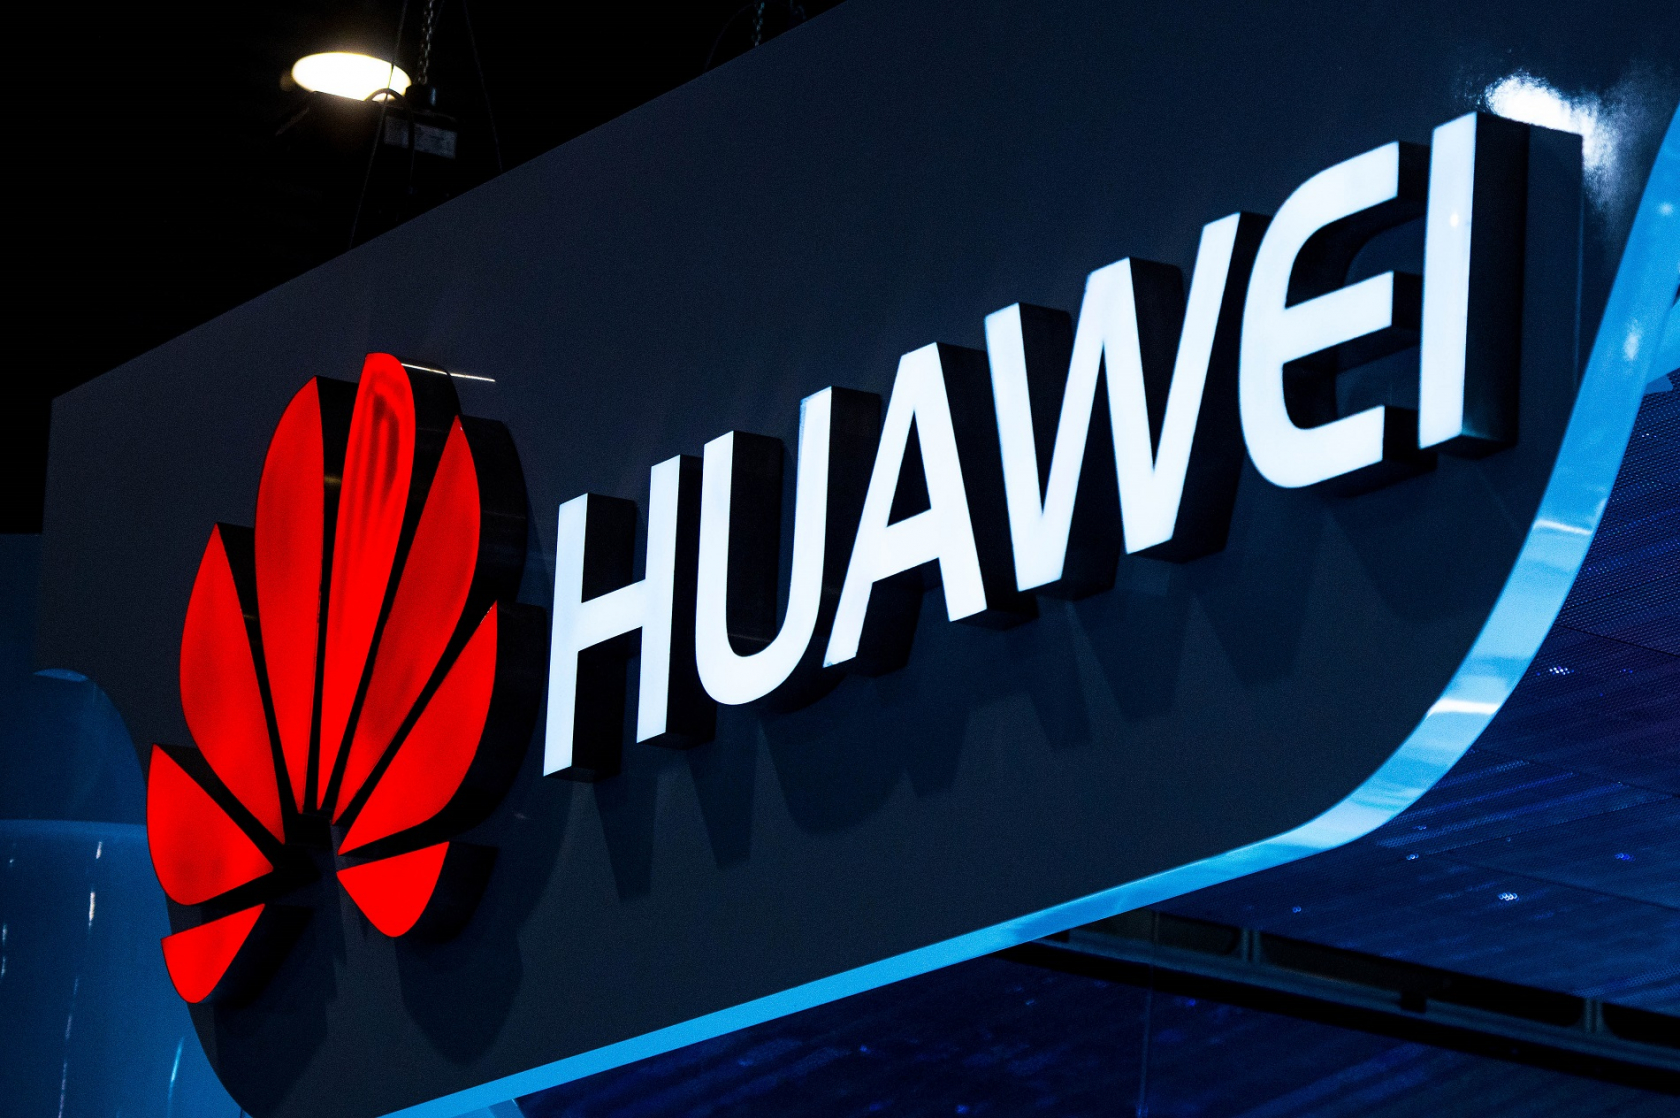 Huawei CFO arrested in Canada for allegedly violating Iran sanctions, China demands release